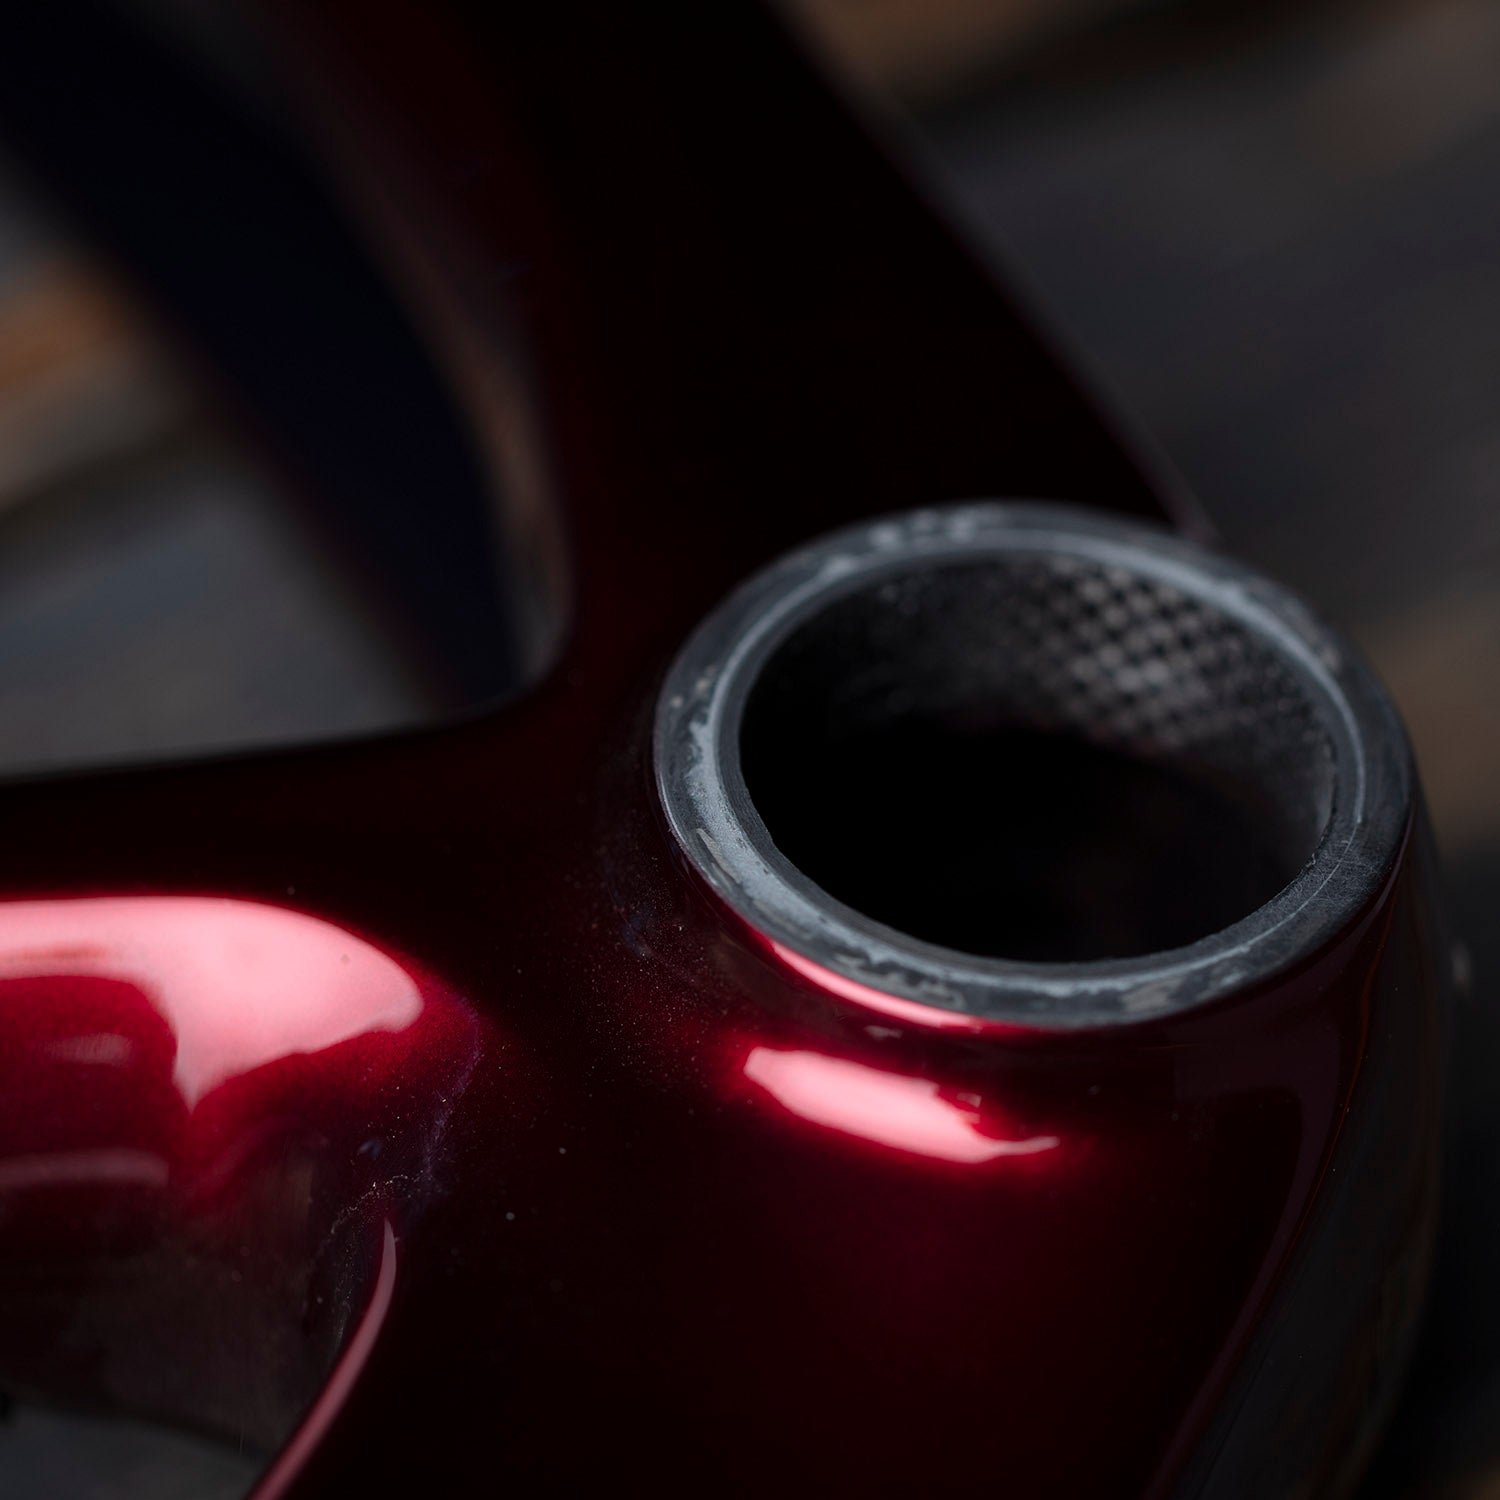 Close up image of the pedal insert for the De Rosa frameset in maroon.